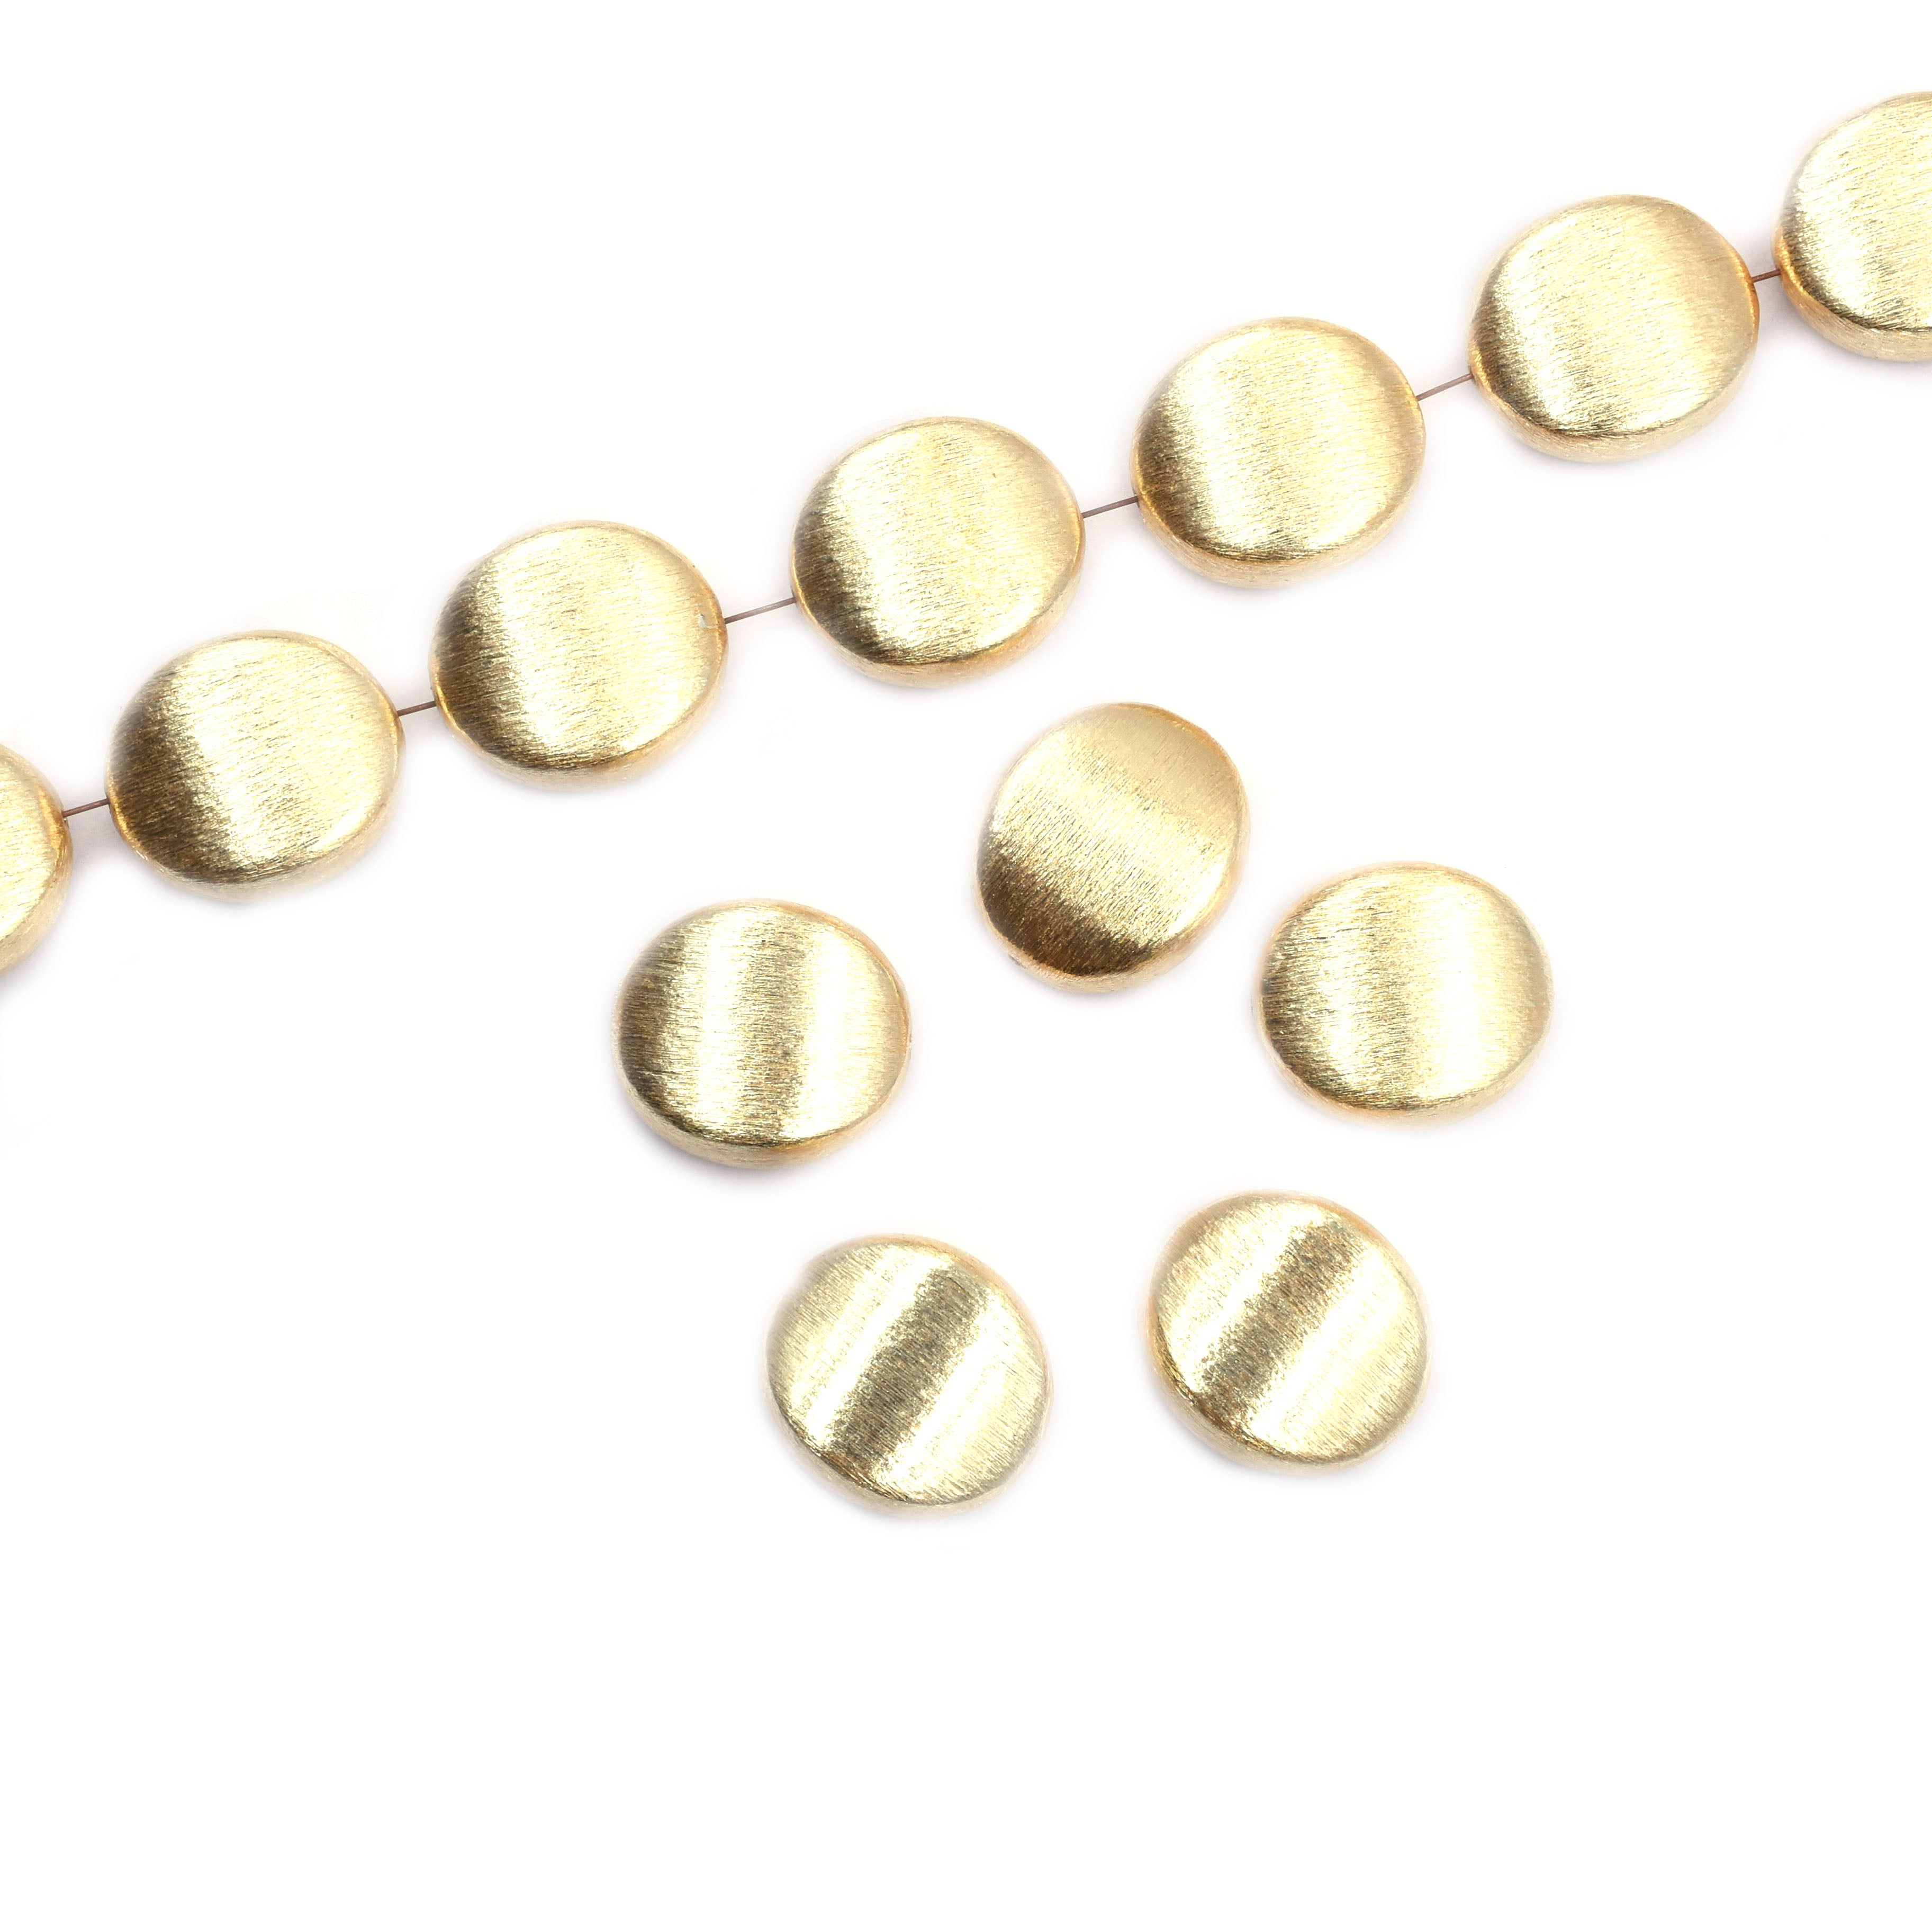 10 Pcs 20mm Oval Brushed Matte Finish Beads Gold Plated Copper